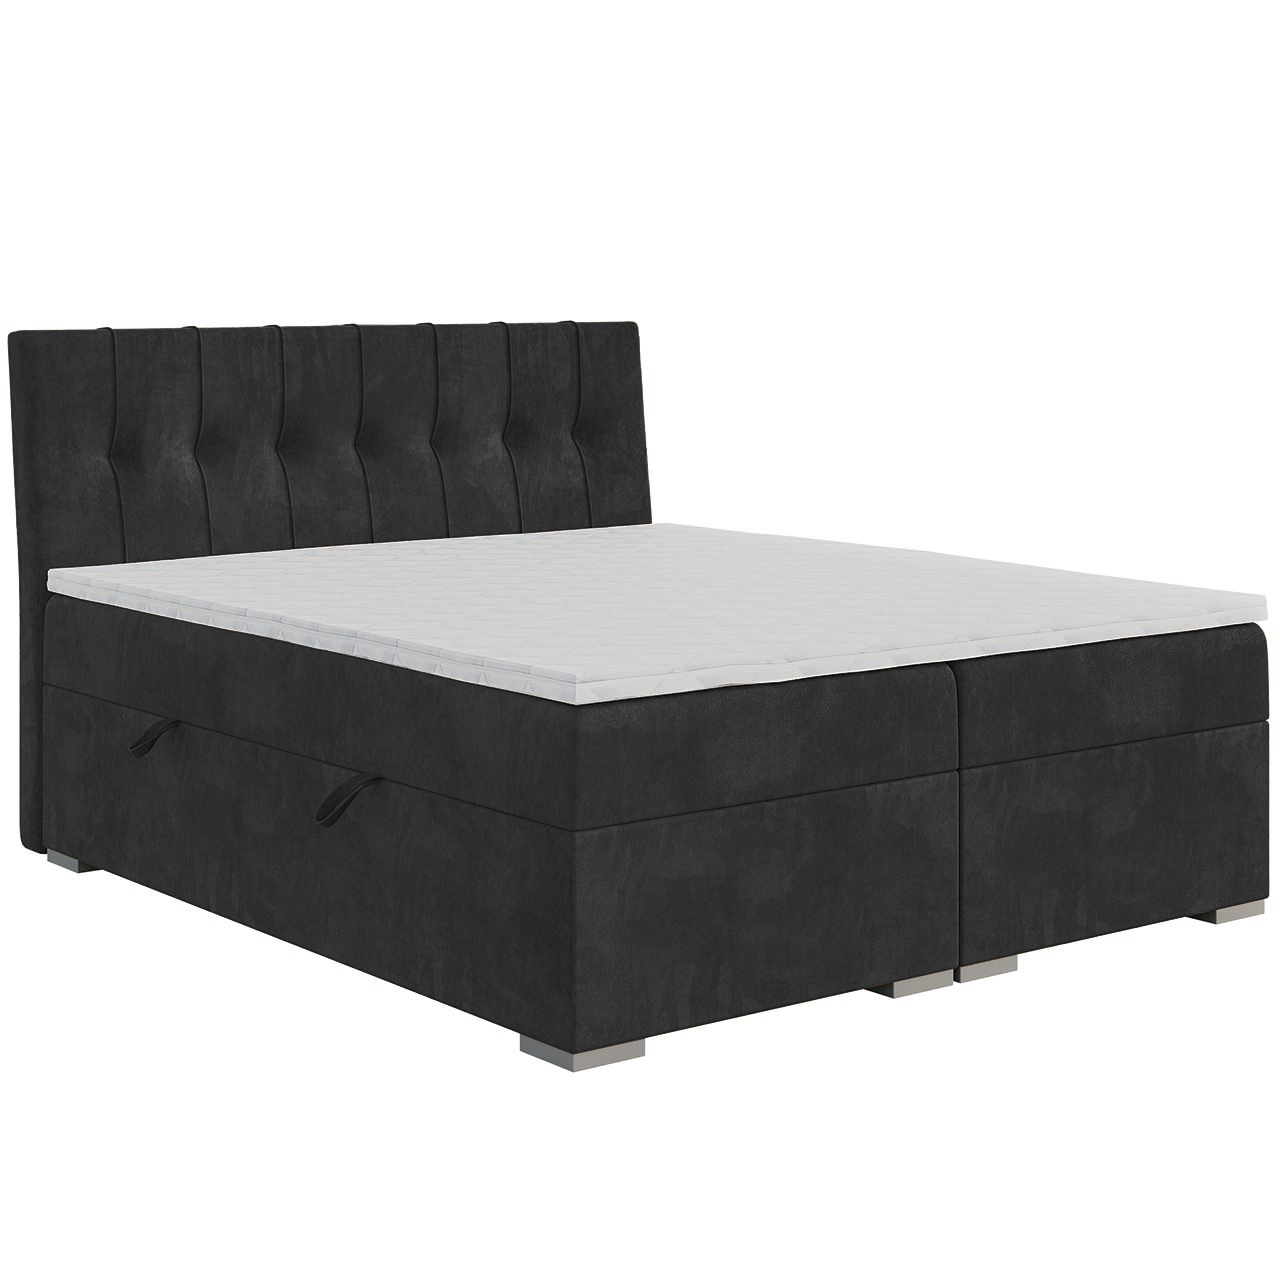 Upholstered bed DANO 160x200 riviera 97